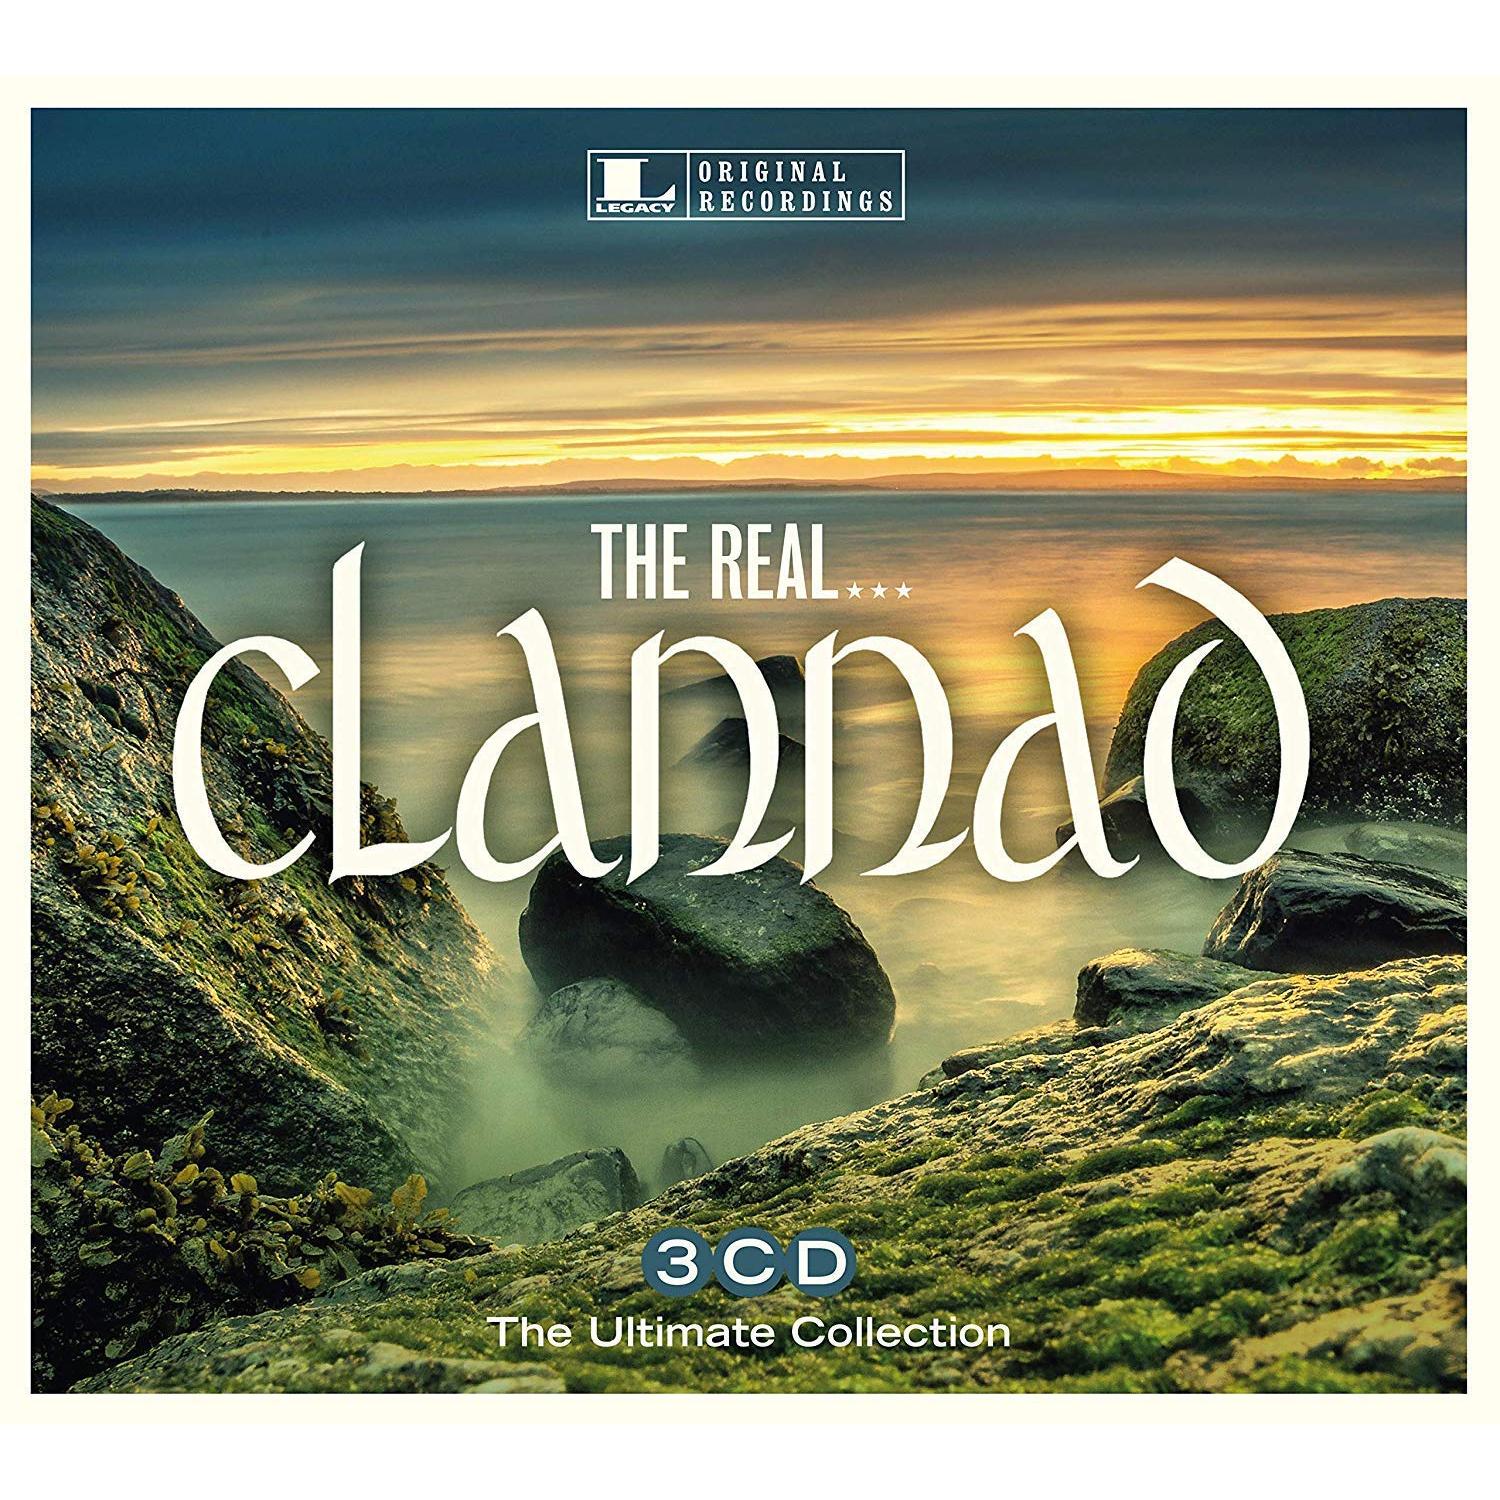 THE REAL... CLANNAD